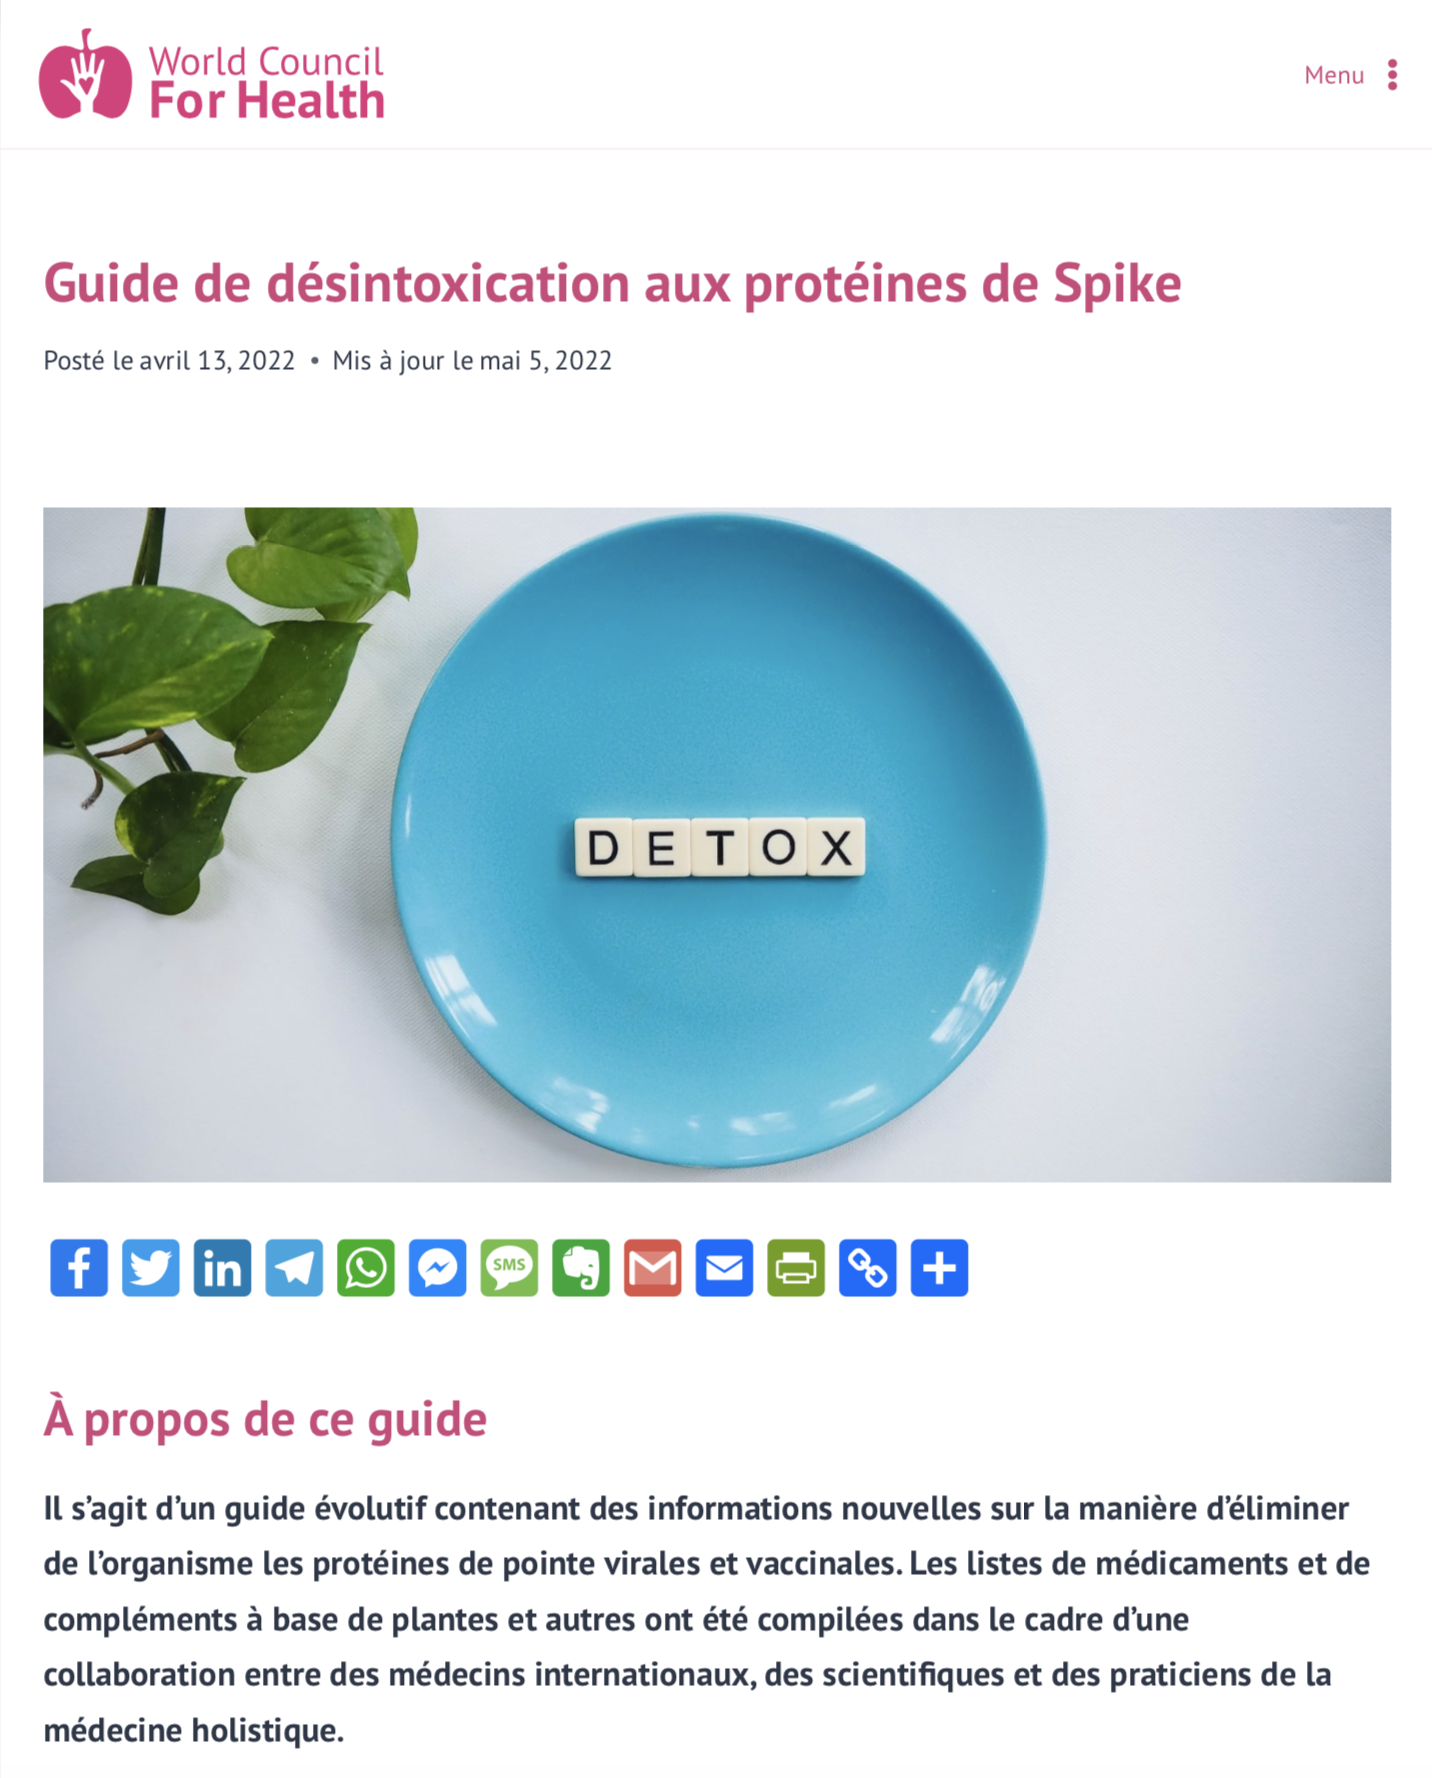 Spike detox guide World Council for Health